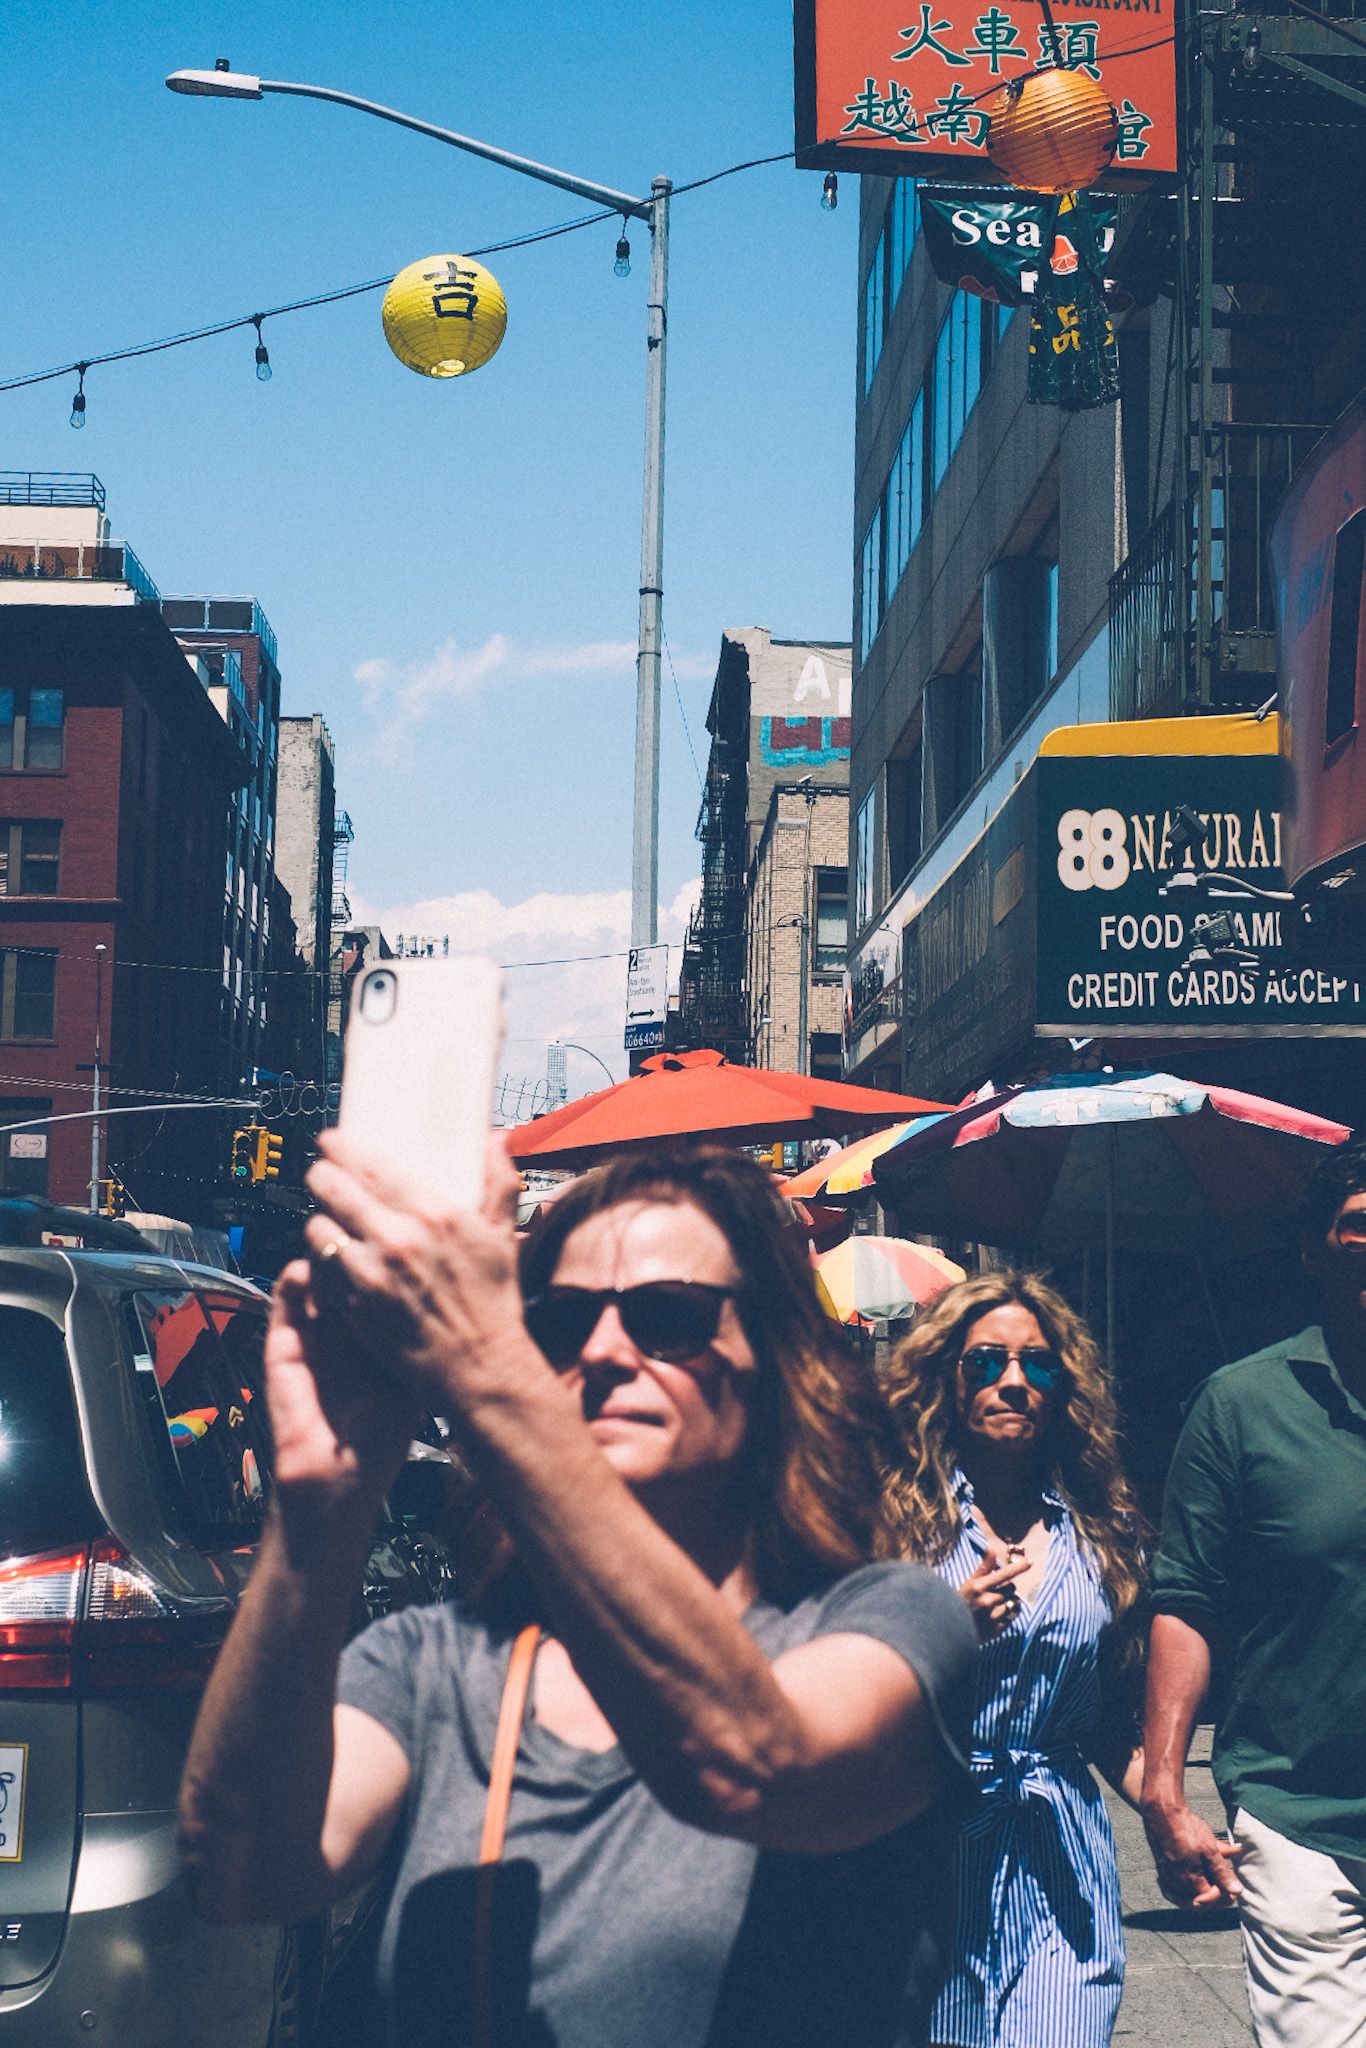 A woman in sunglasses, slightly out of focus, takes a photo with her phone in Chinatown. Other people pass behind her. The sky is so blue.